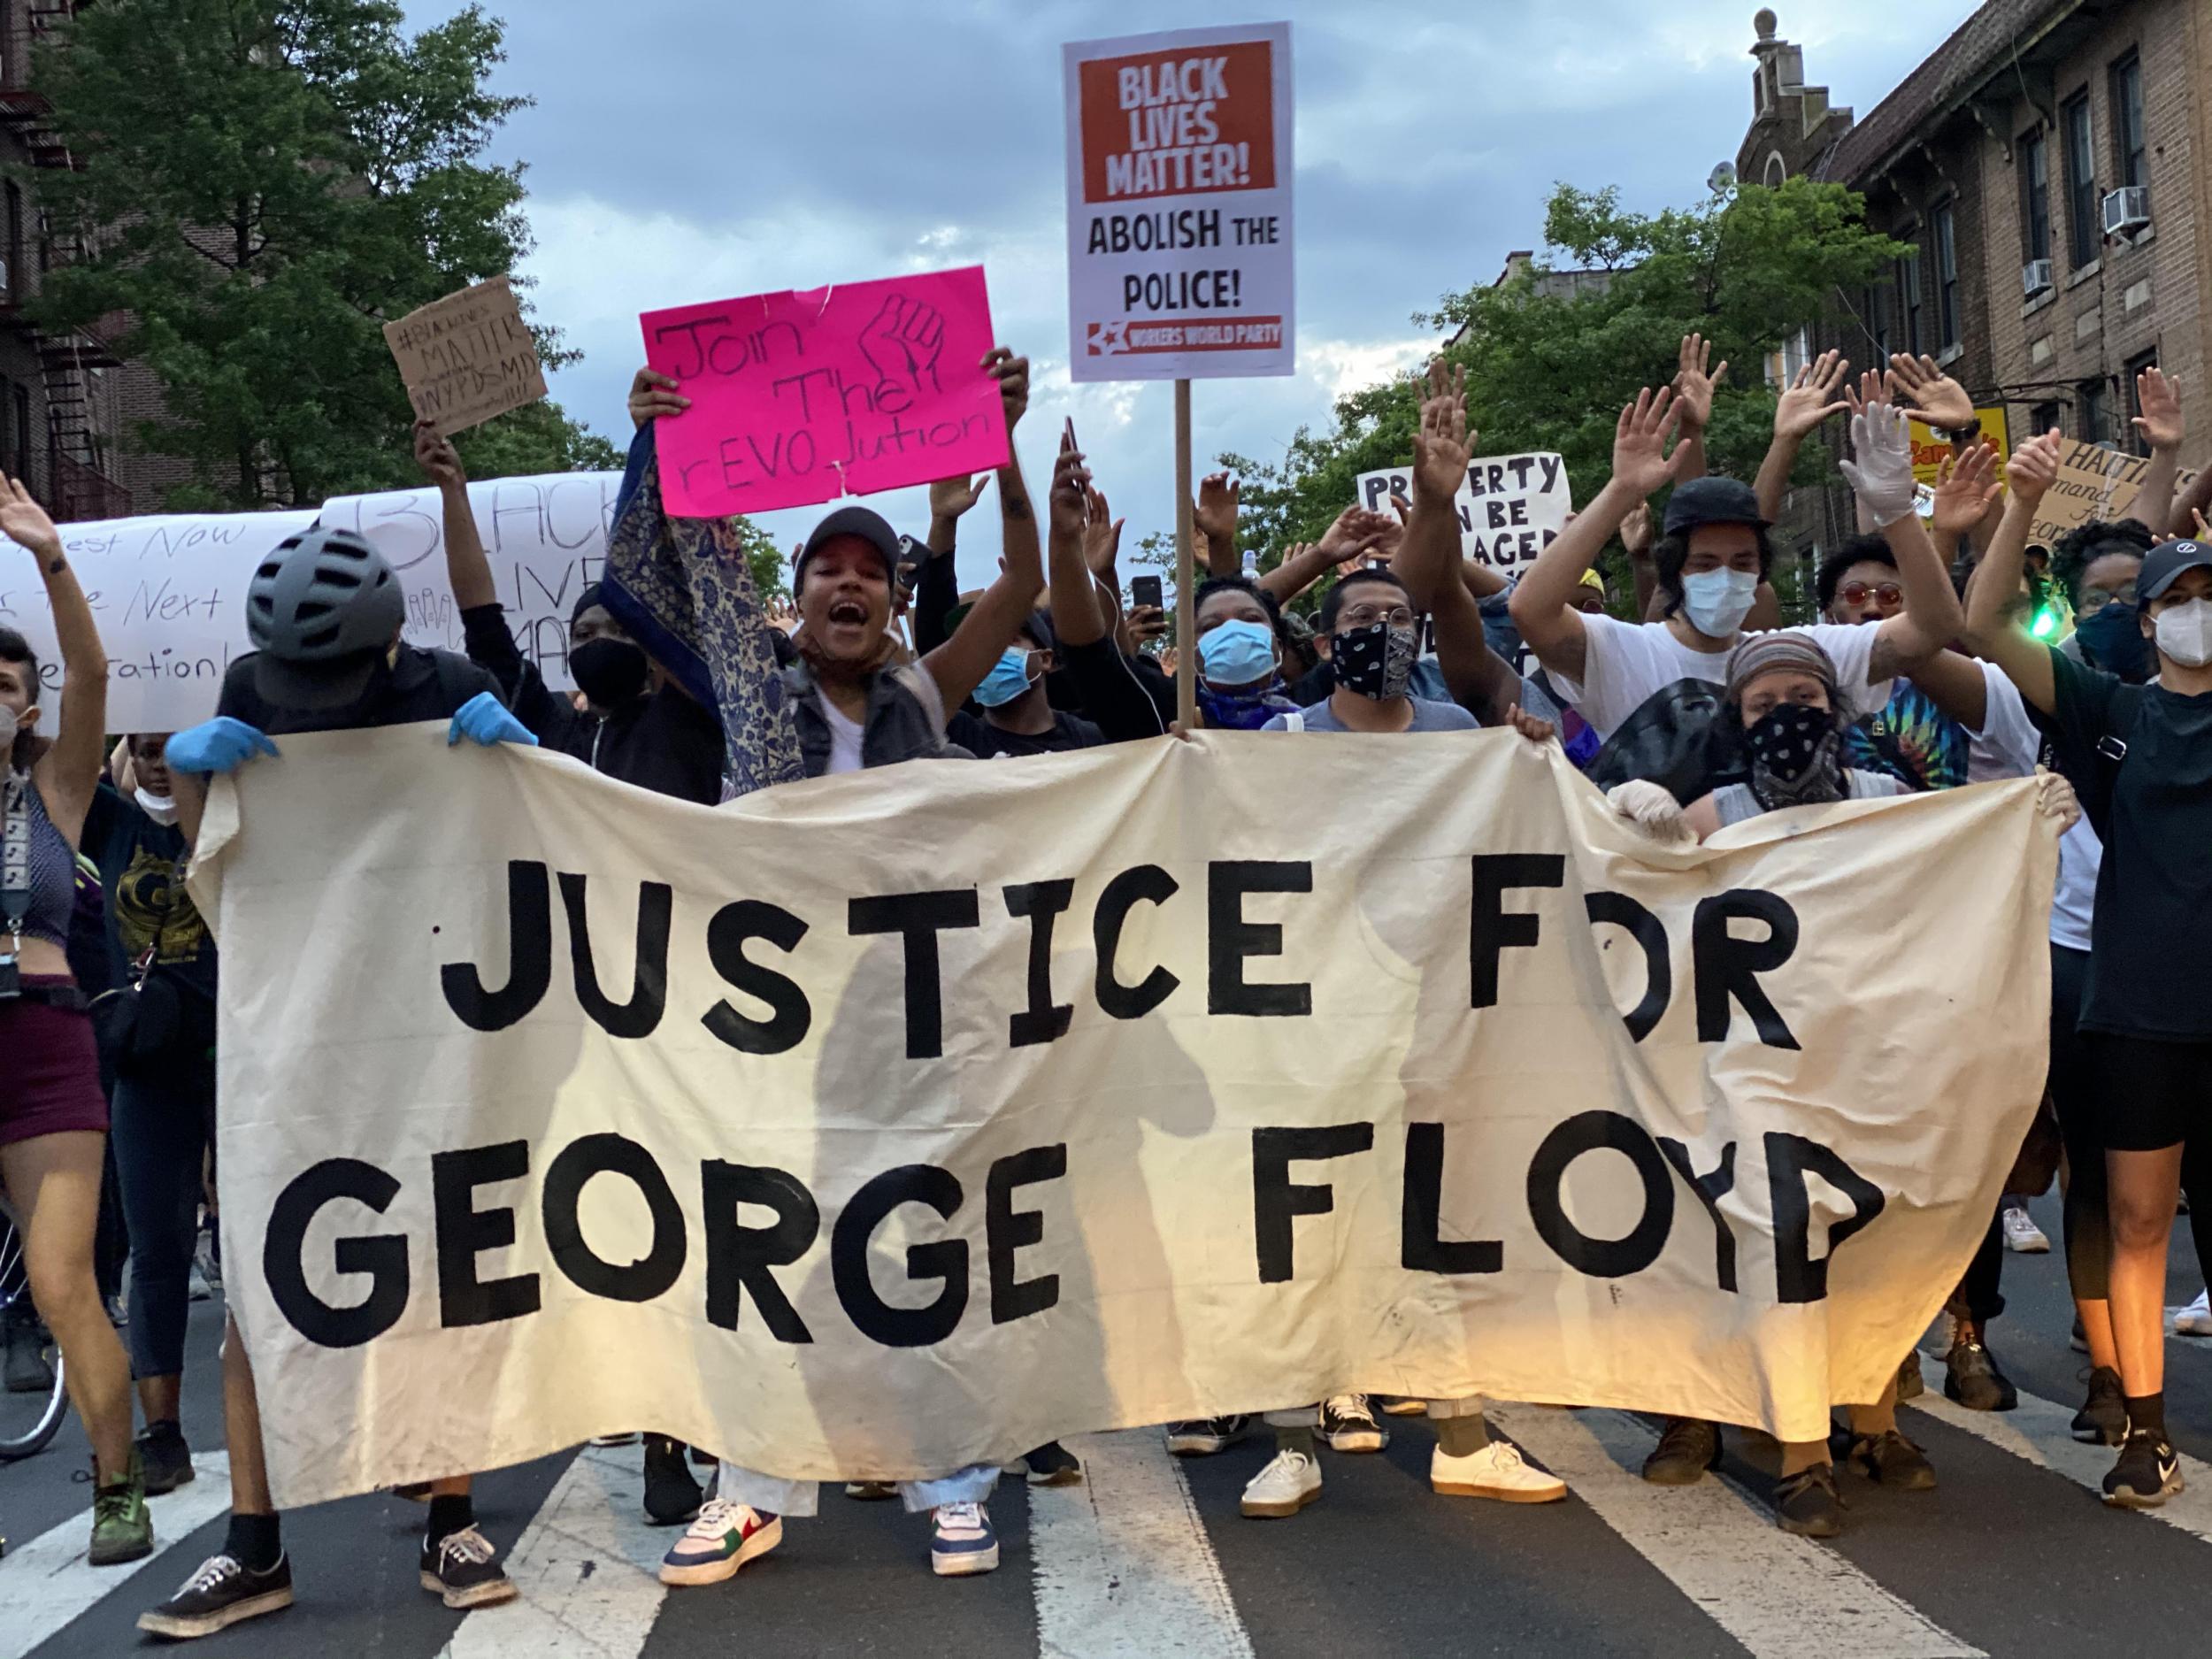 'We don't need any more politicians telling us to calm down': Brooklyn burns as protesters demand action over police killing of George Floyd 